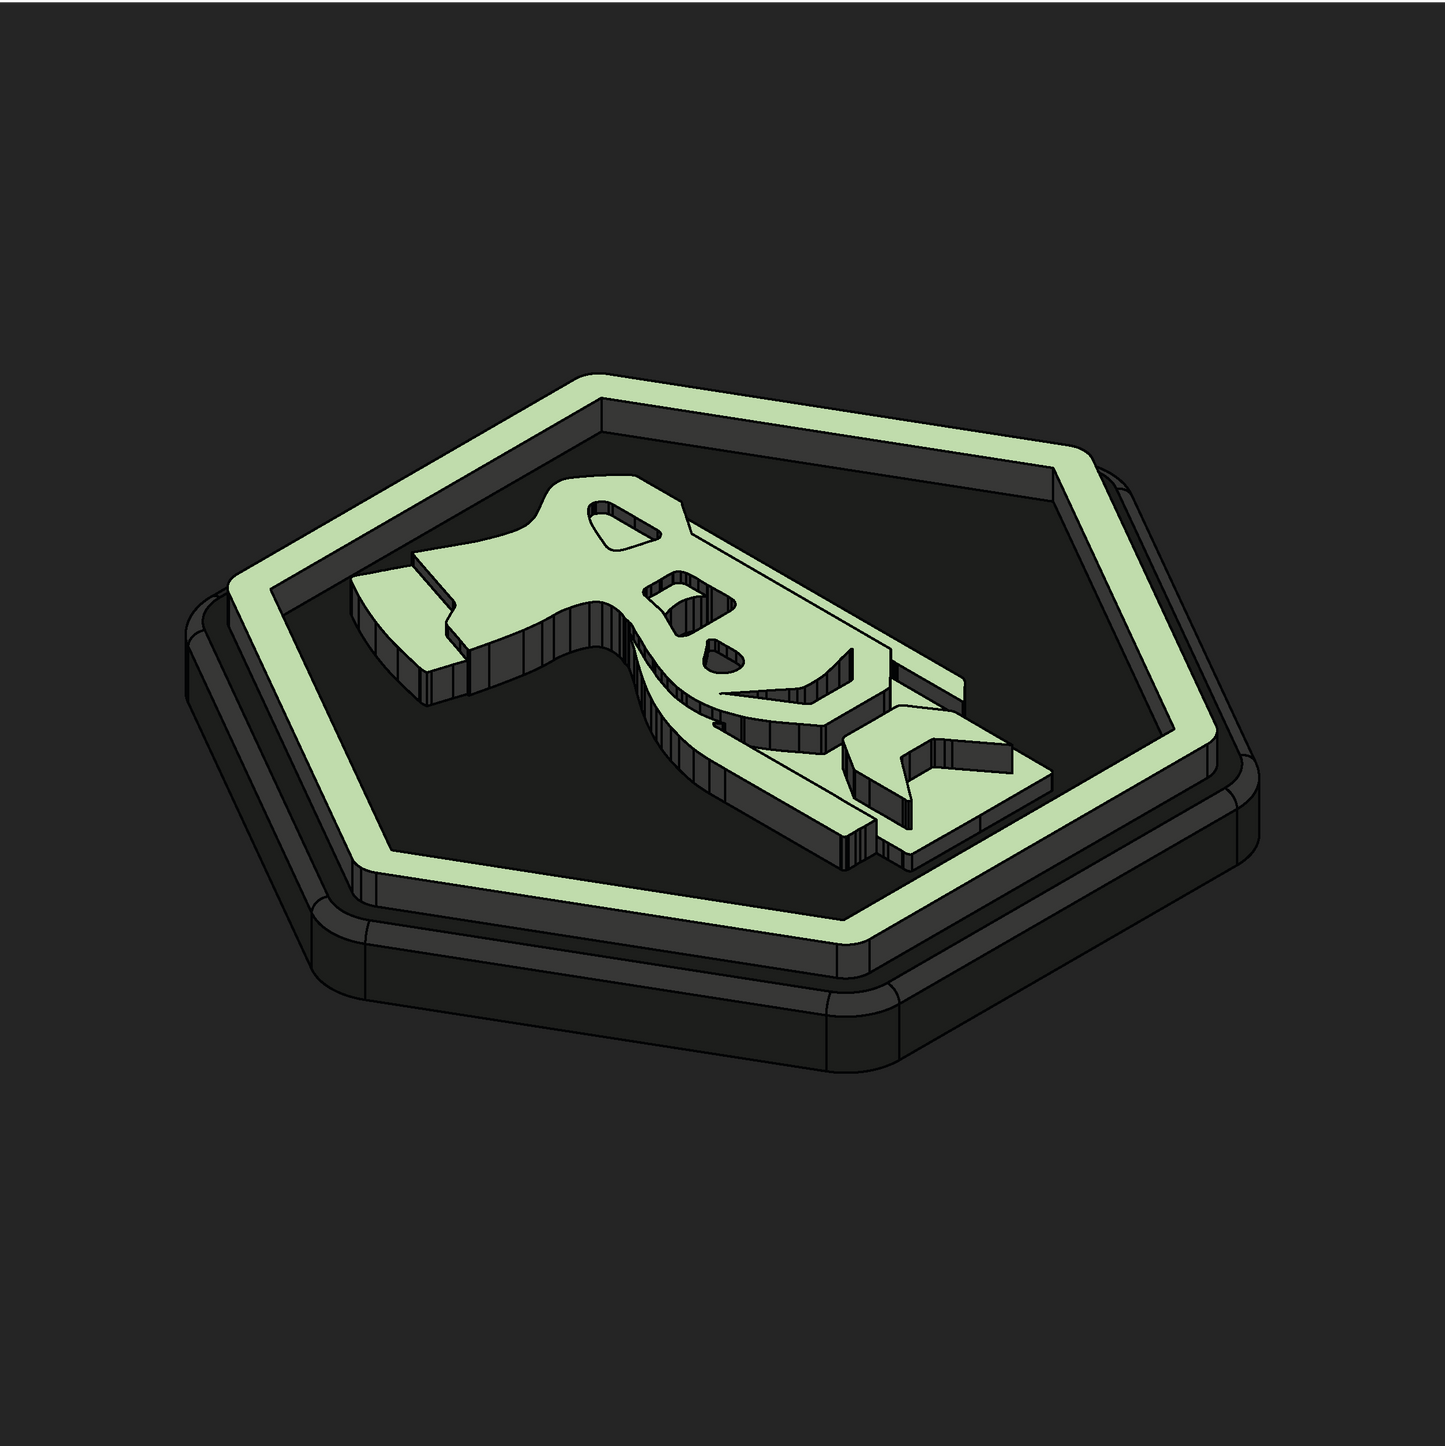 Taser Icon Glow Velcro Patches - Hexapatch